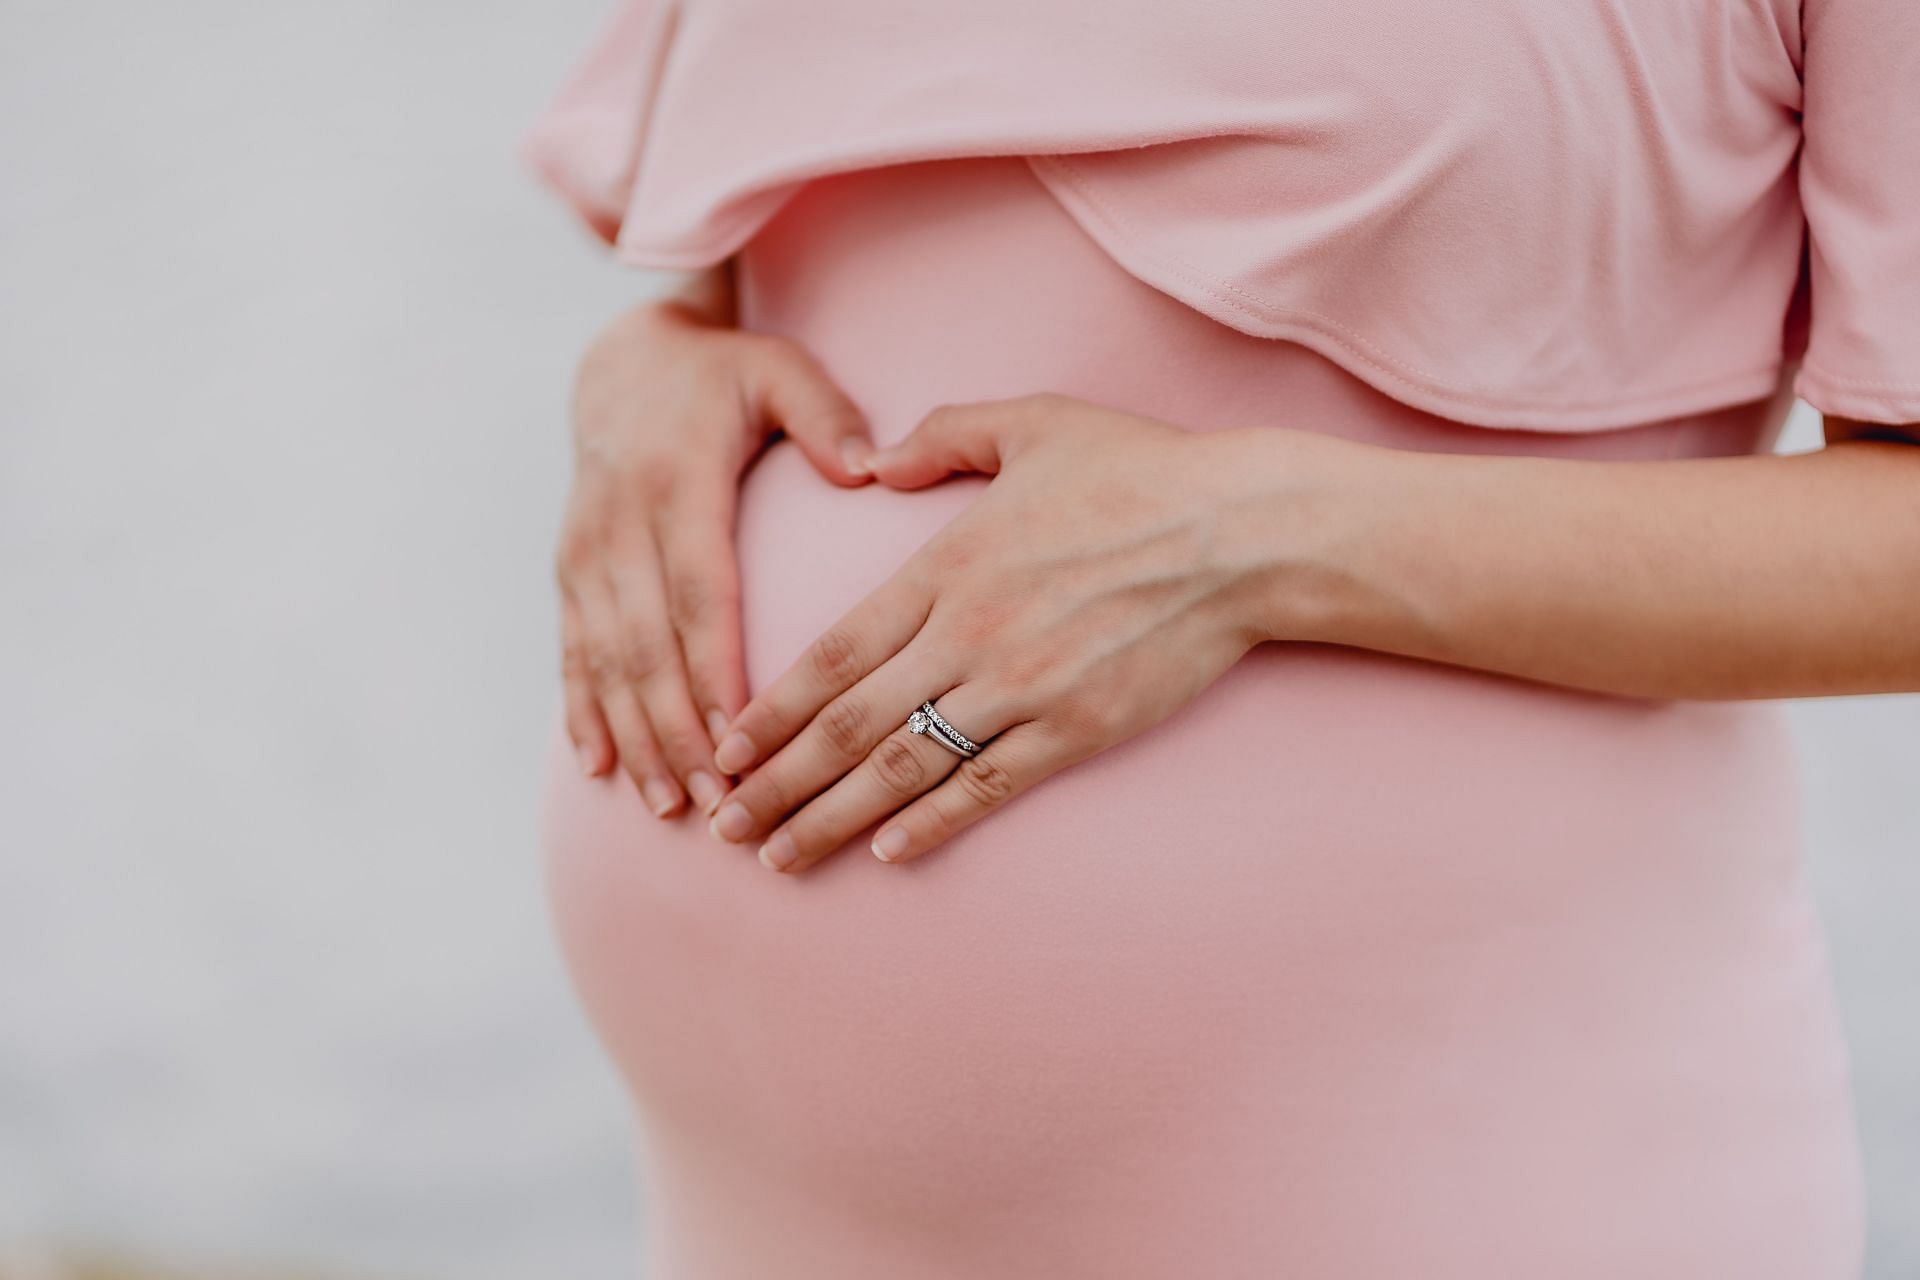 Missed periods are one of the early signs of pregnancy. (Image via Unsplash/ Juan Encalada)